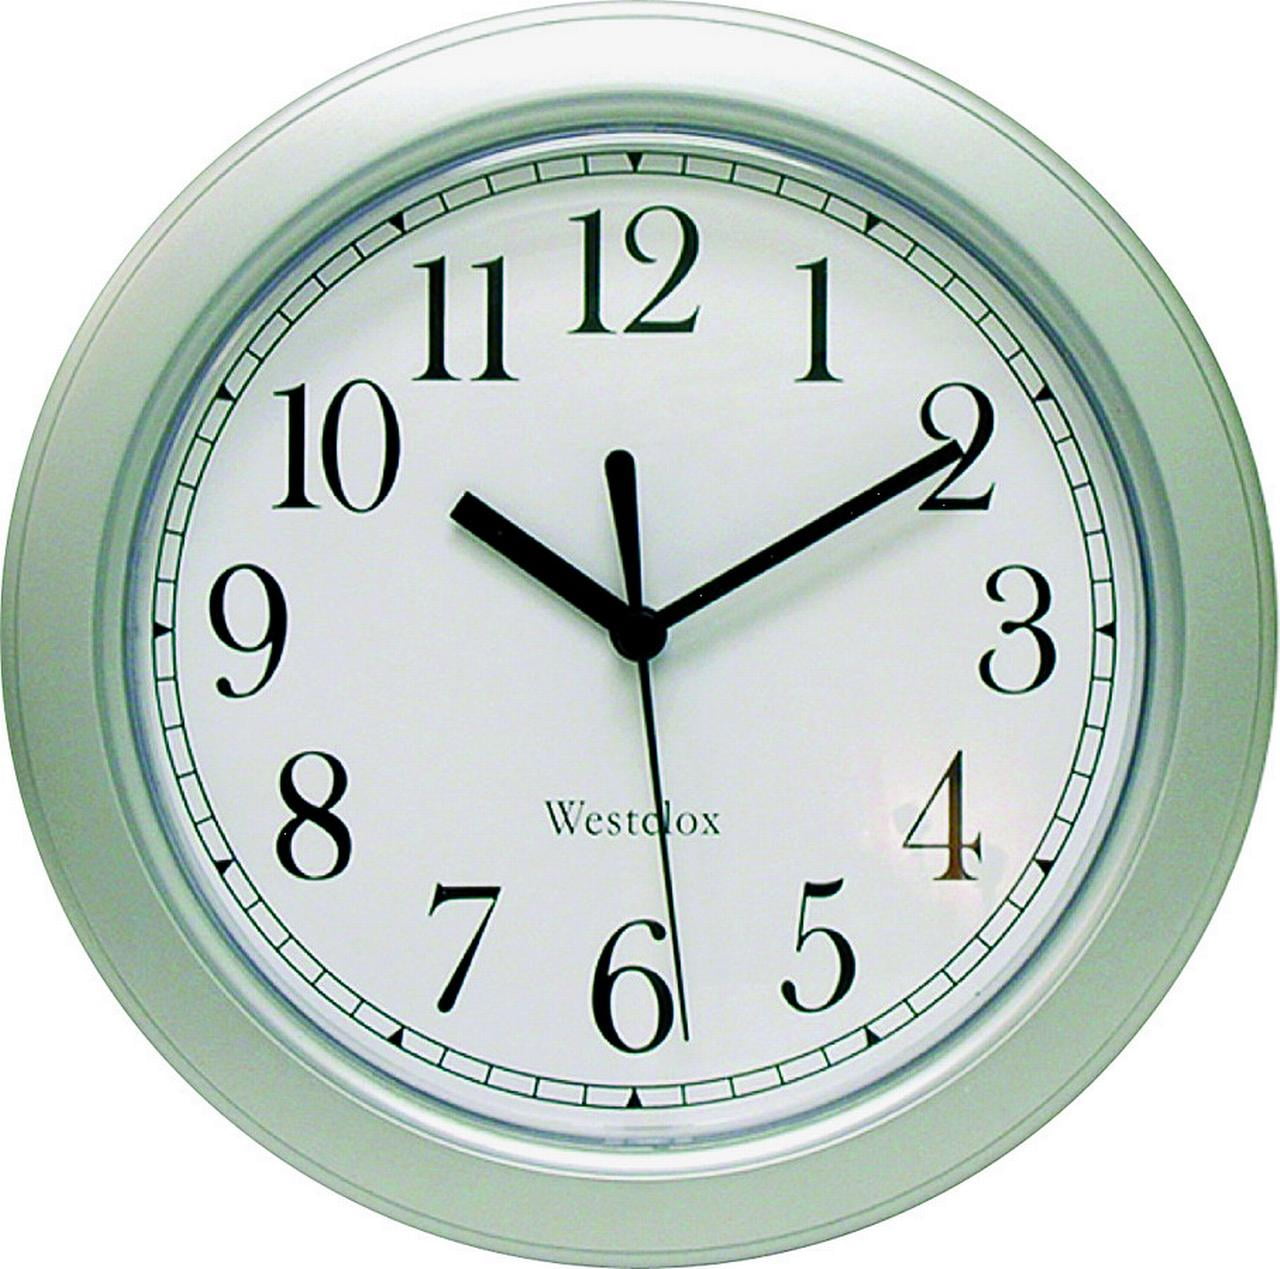 8.5 ROUND WALL CLOCK SILVER 